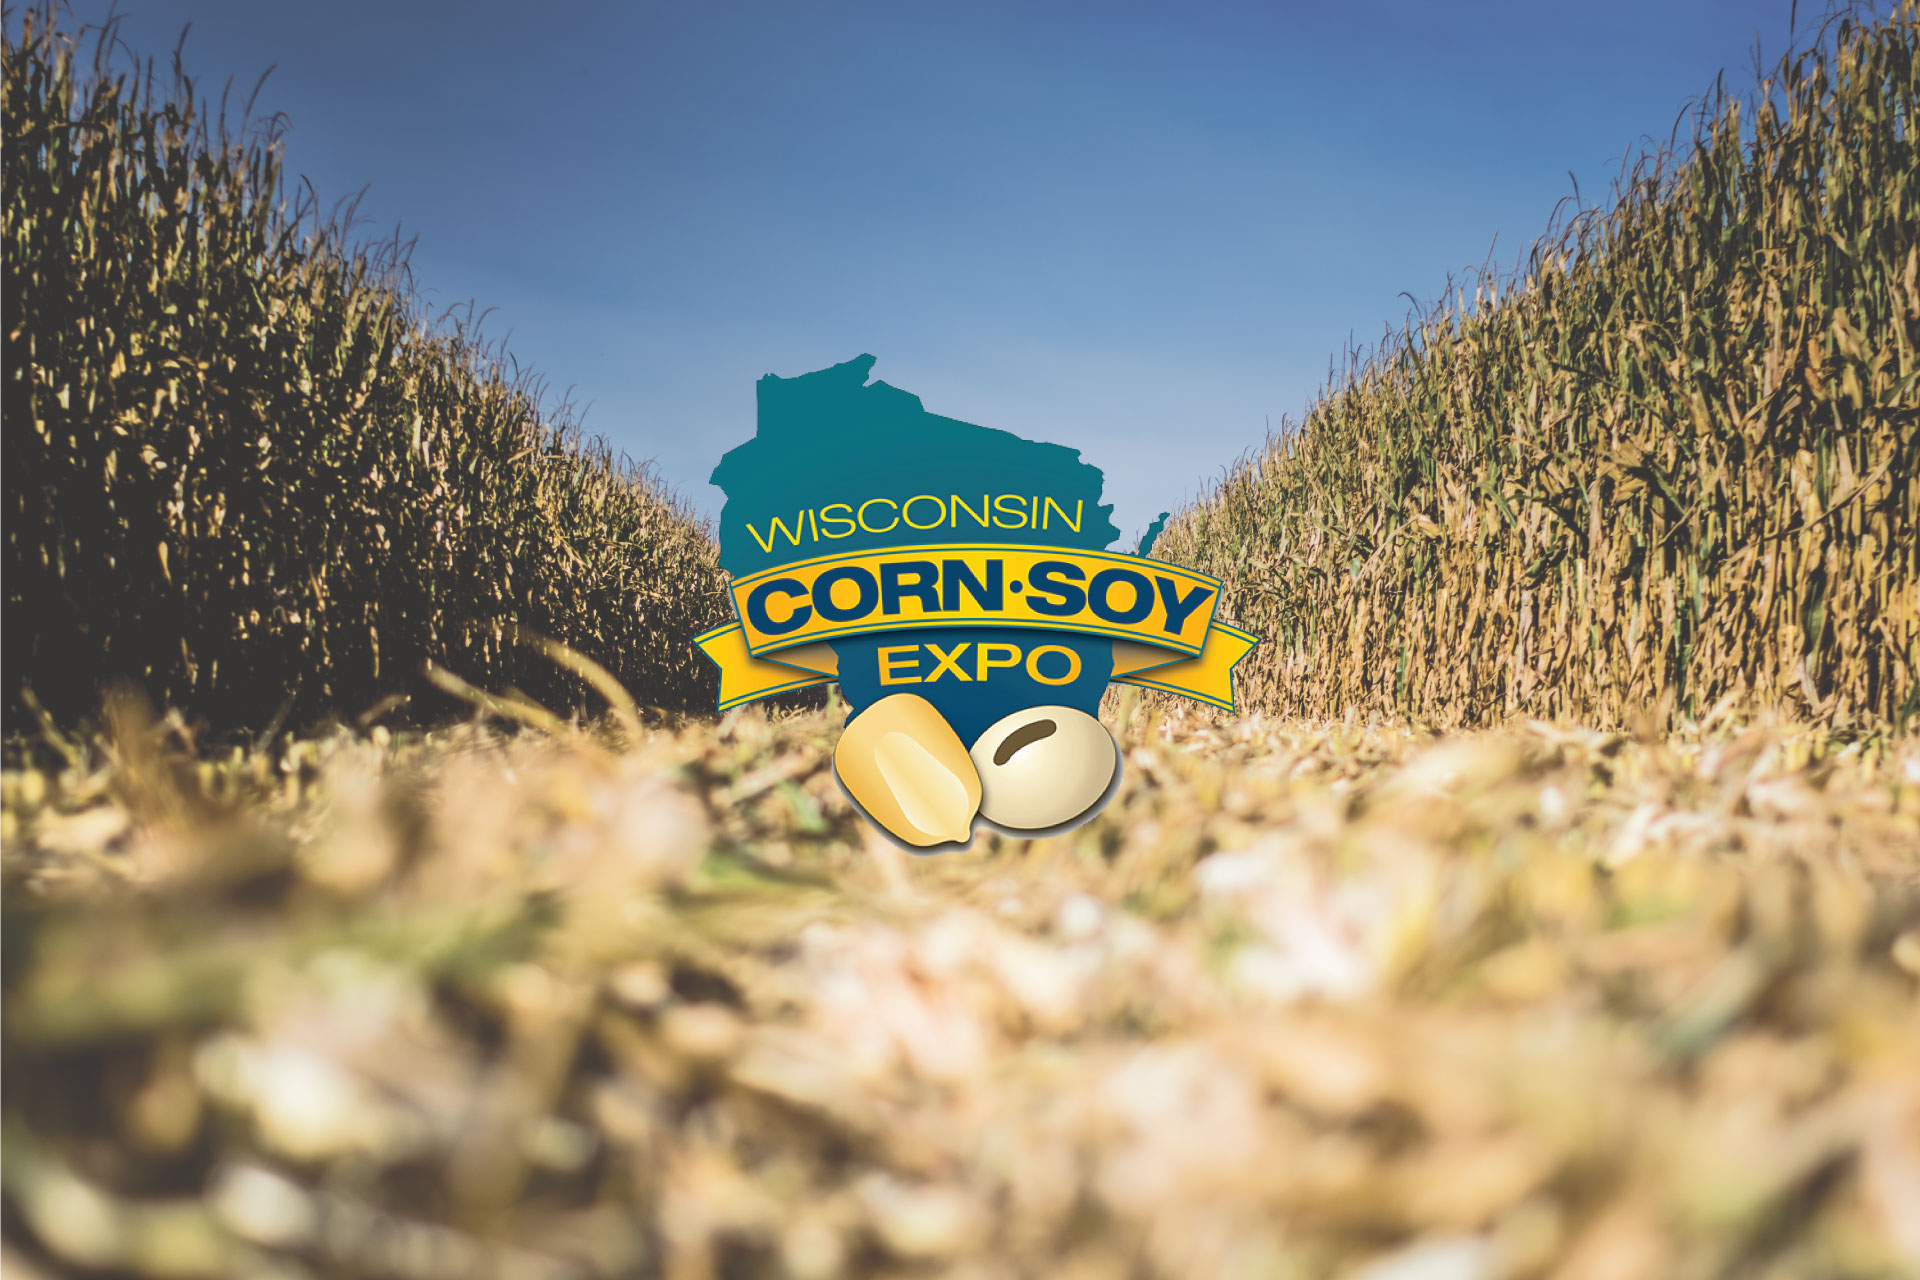 Wisconsin Corn/Soy Expo Registration Available